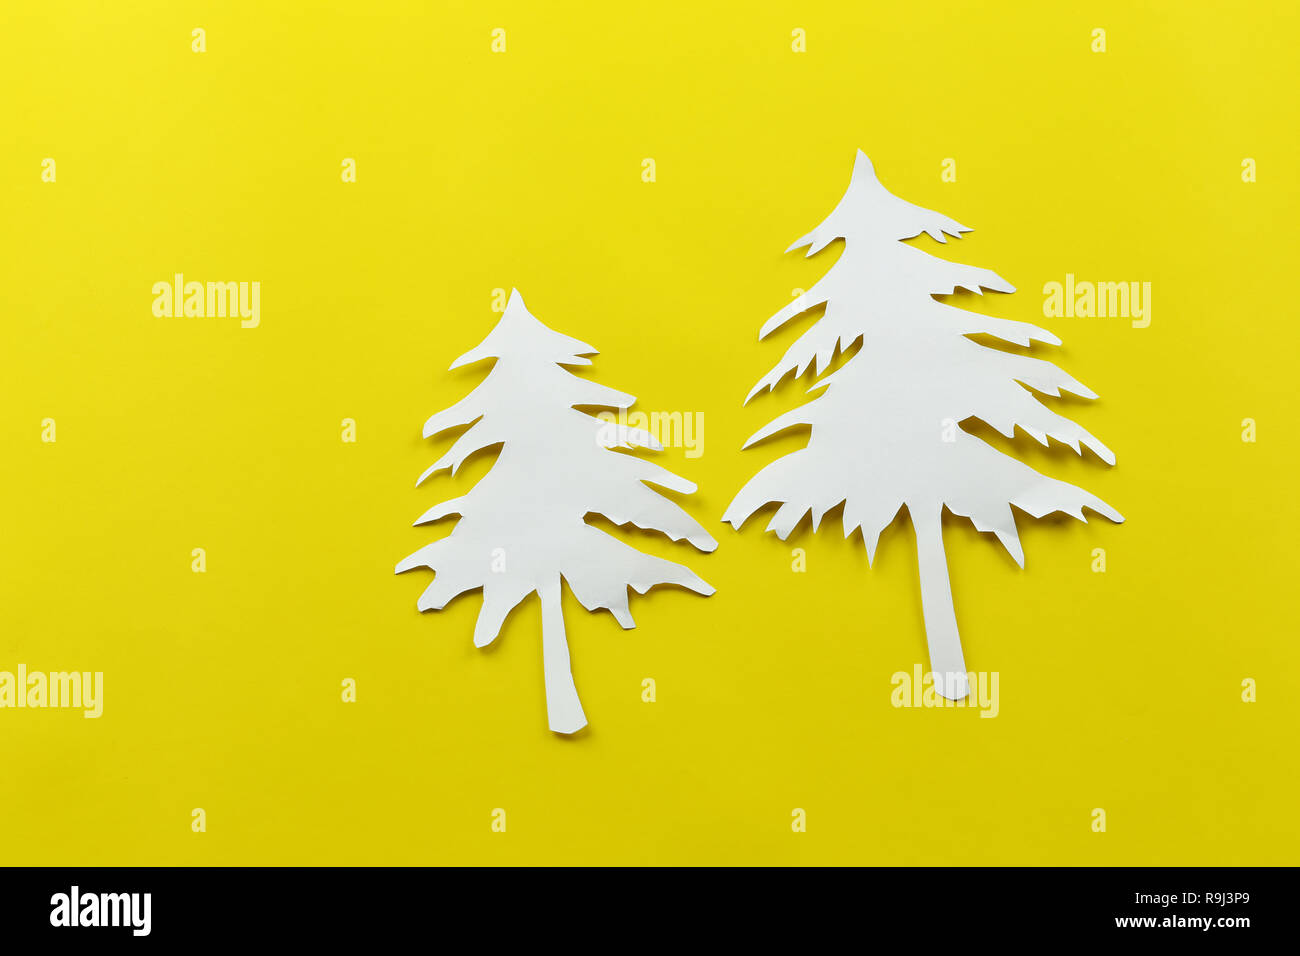 Christmas tree shape of white paper on yellow paper background for design in your festival concept. Stock Photo